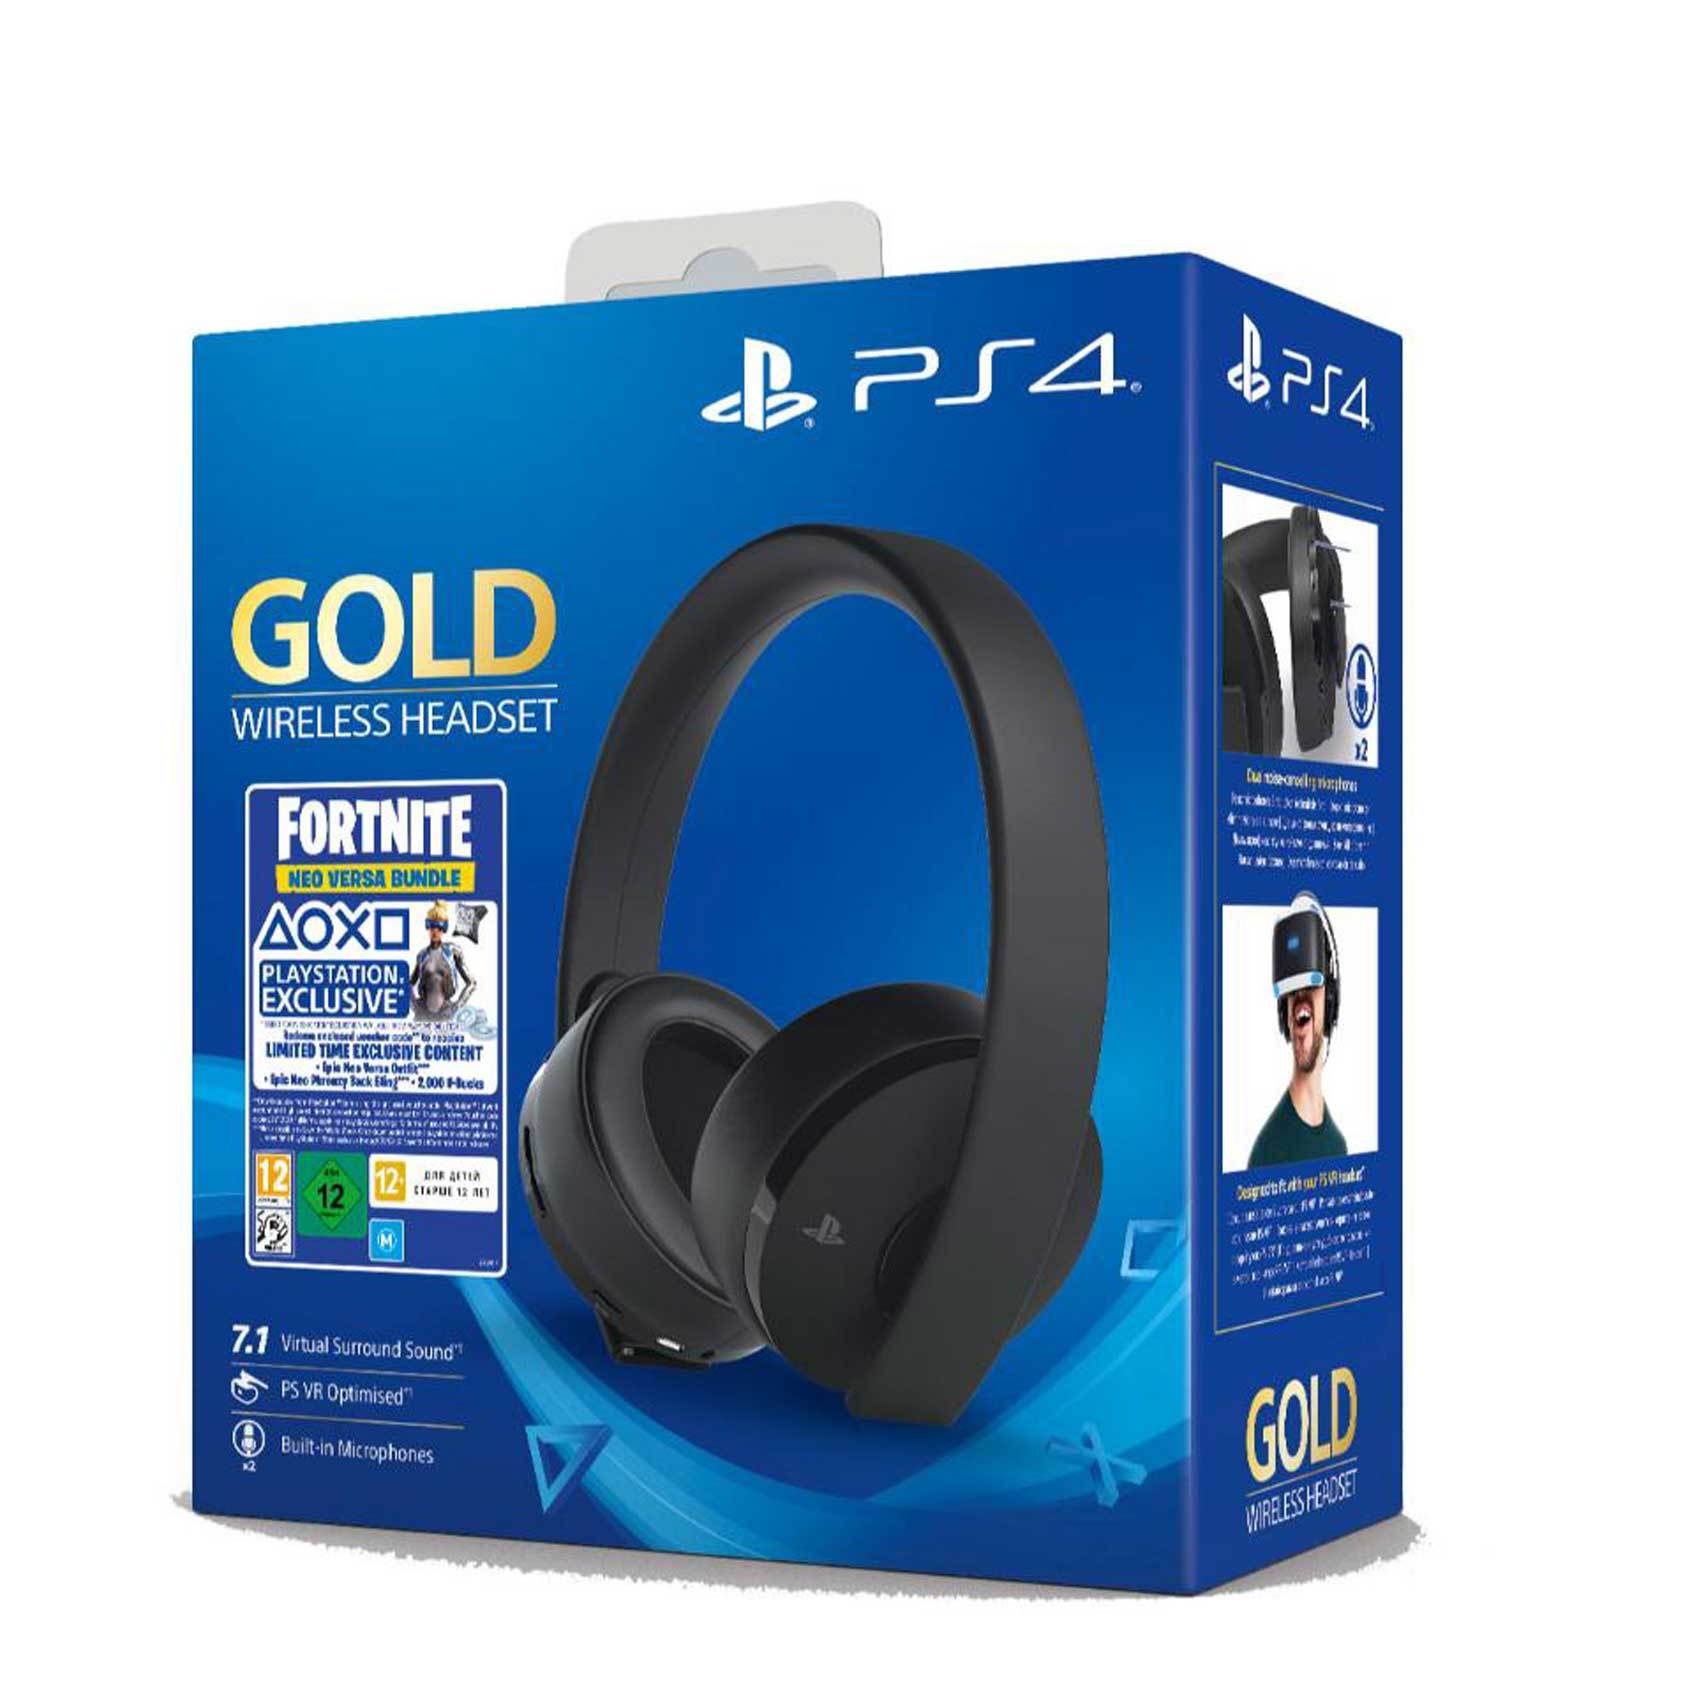 ps4 gold headset